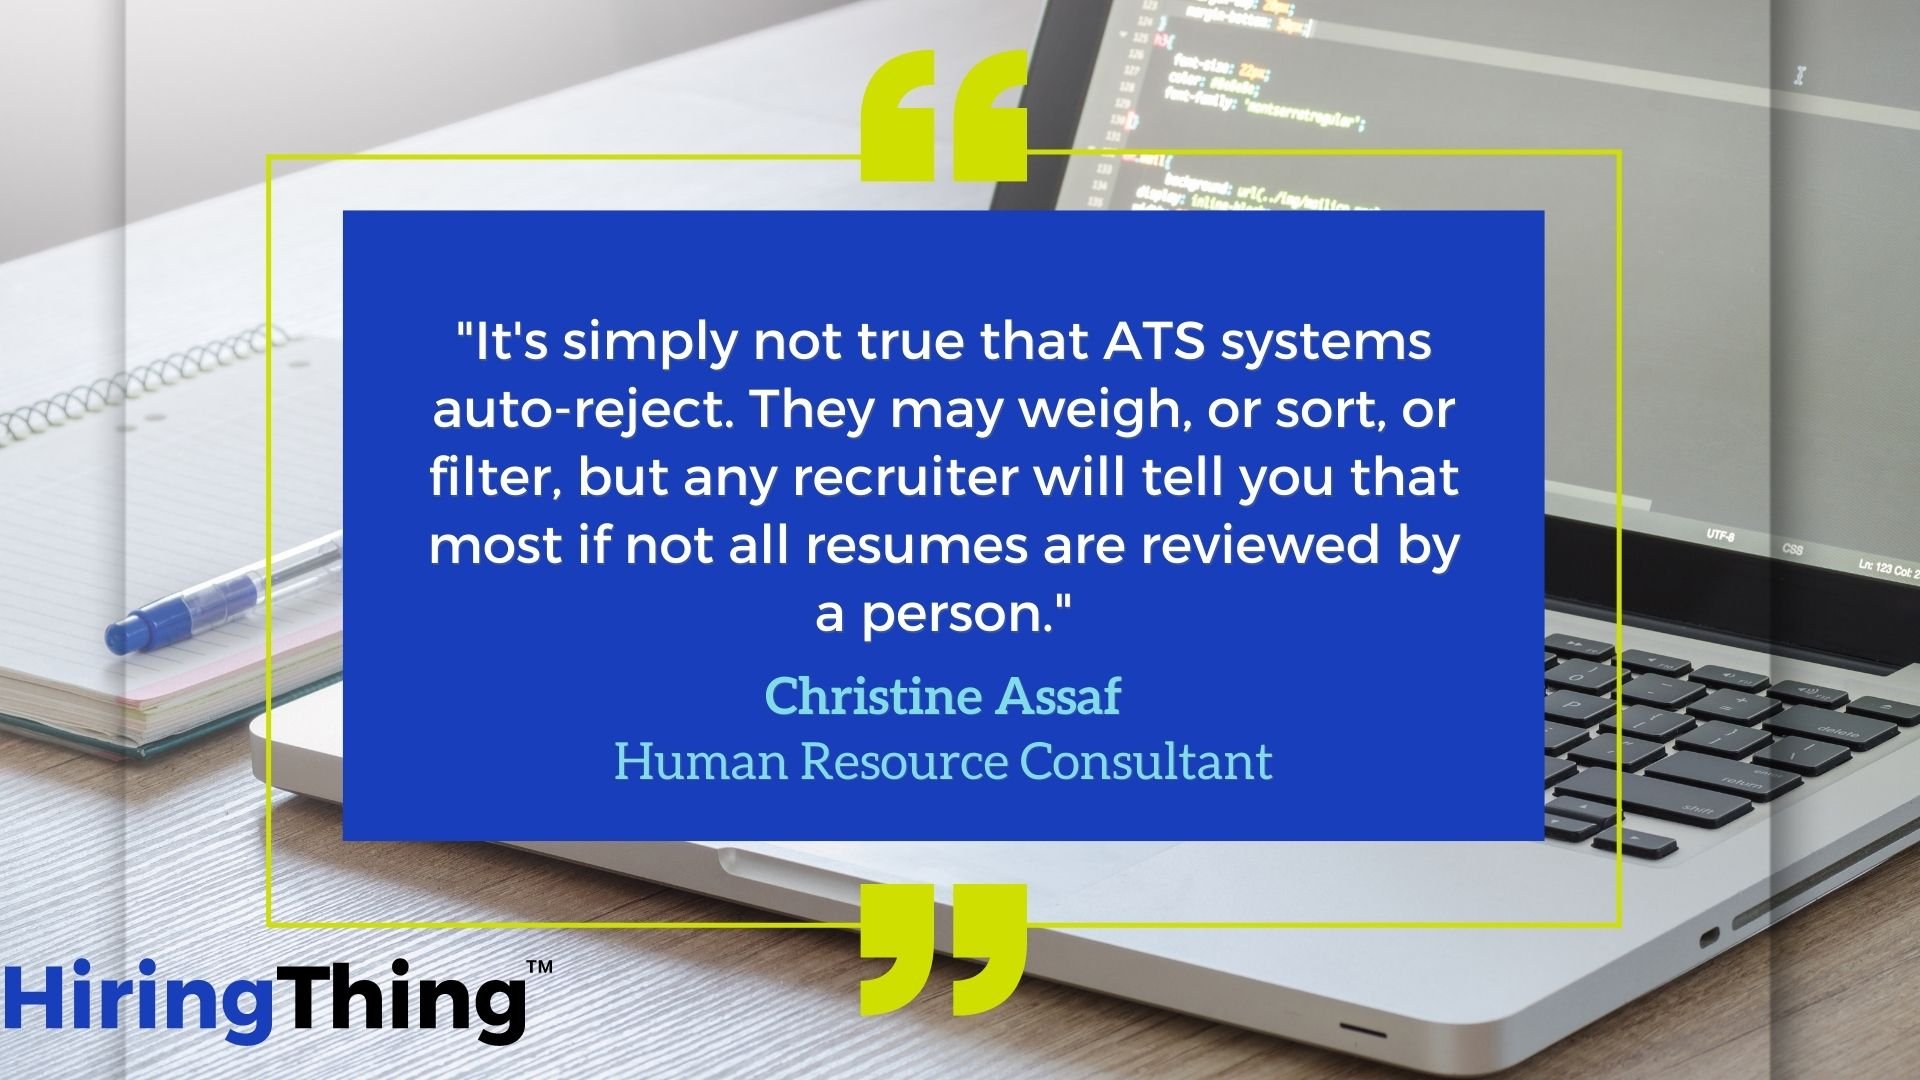 "It's simply not true that ATS systems auto-reject. They may weigh, or sort, or filter, but any recruiter will tell you that most if not all resumes are reviewed by a person."